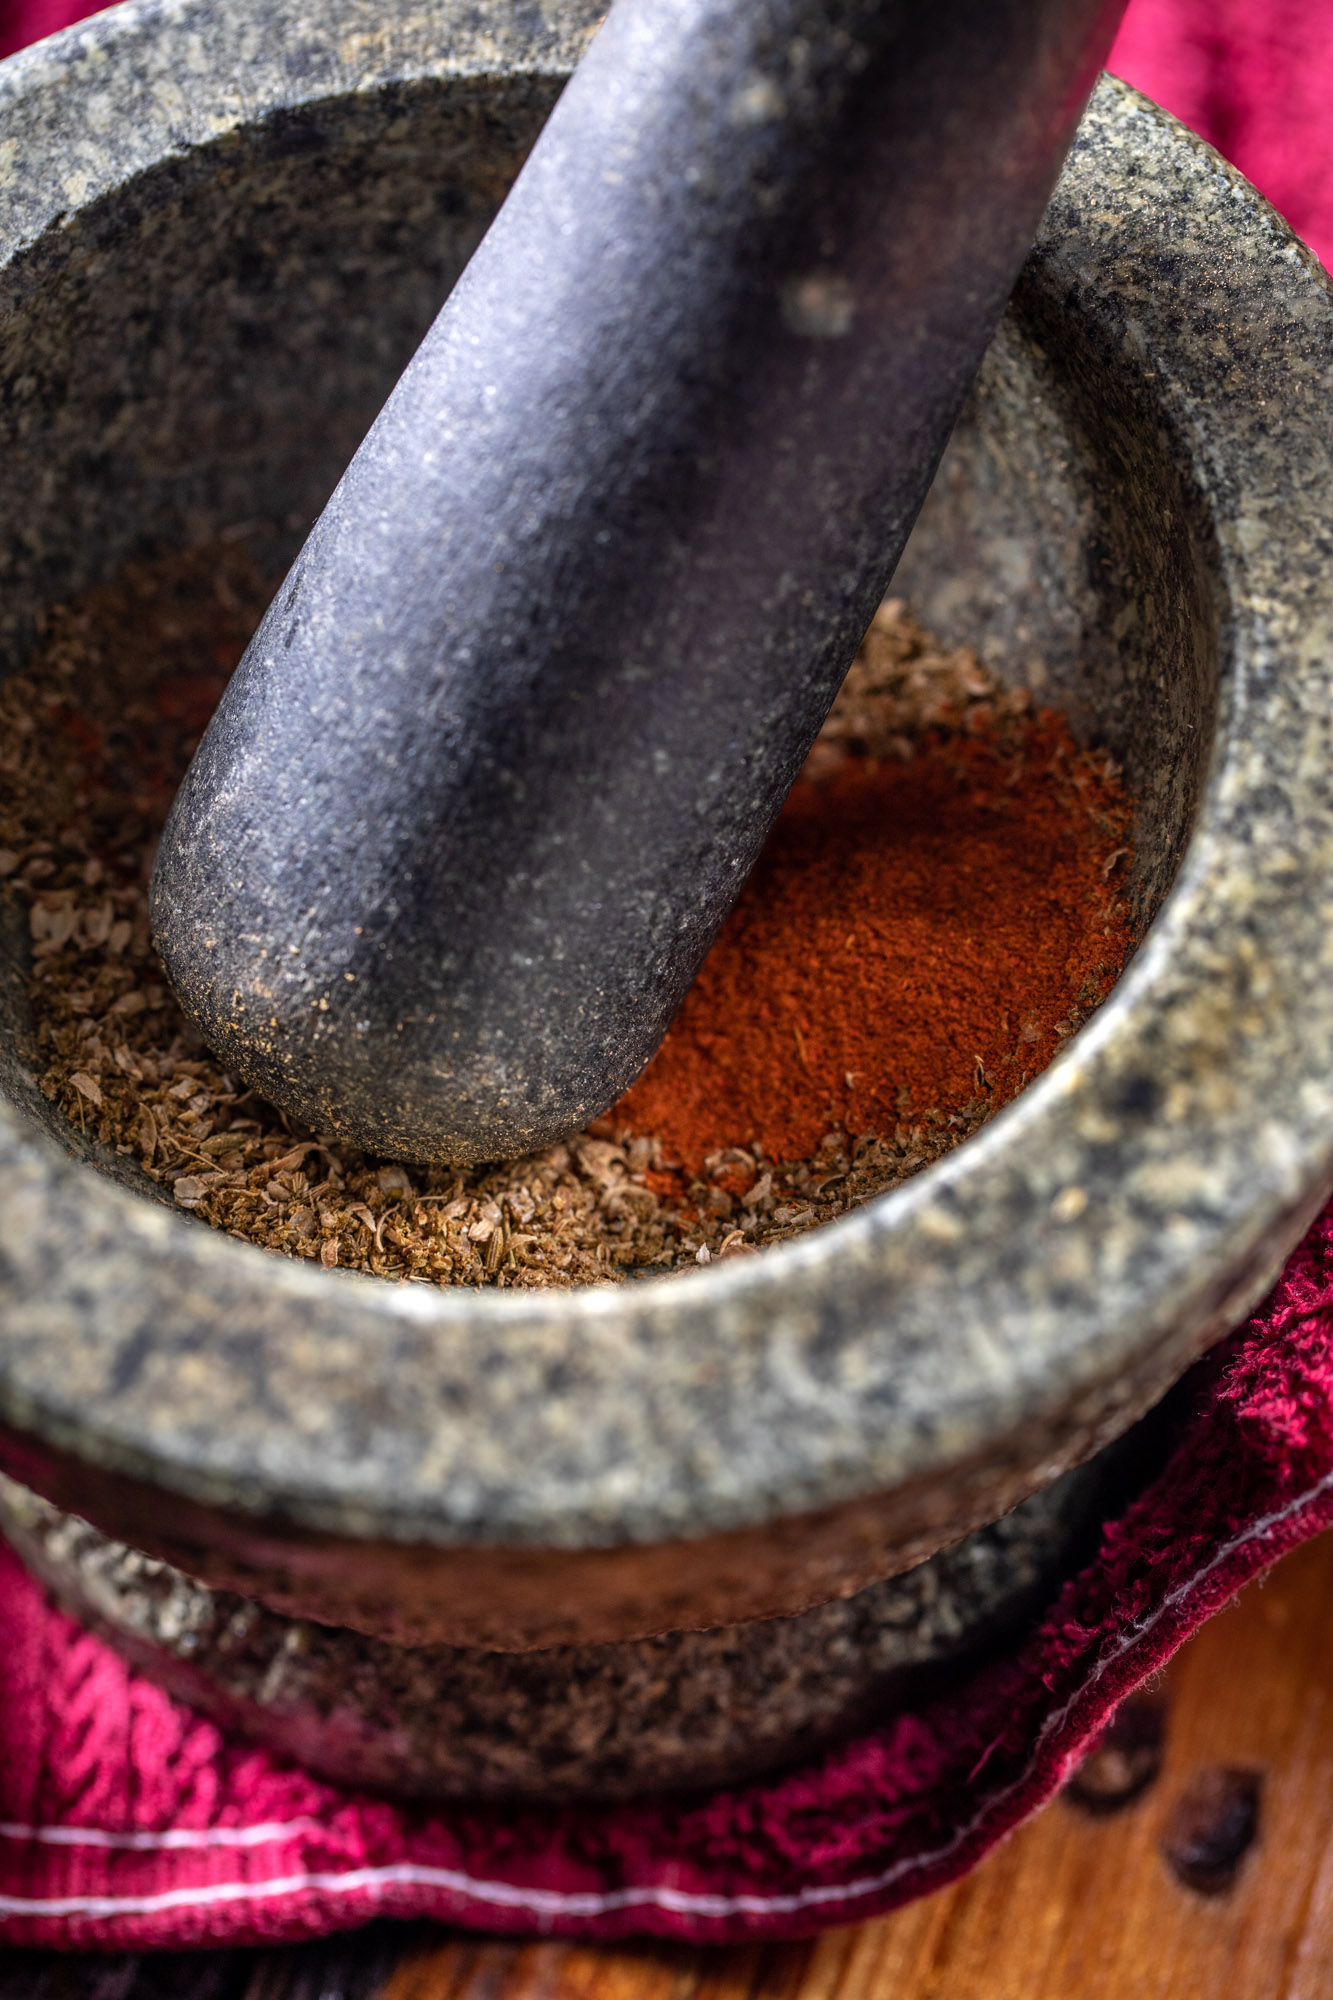 A mortar and pestel grinding up spices to go into an Indian recipe.